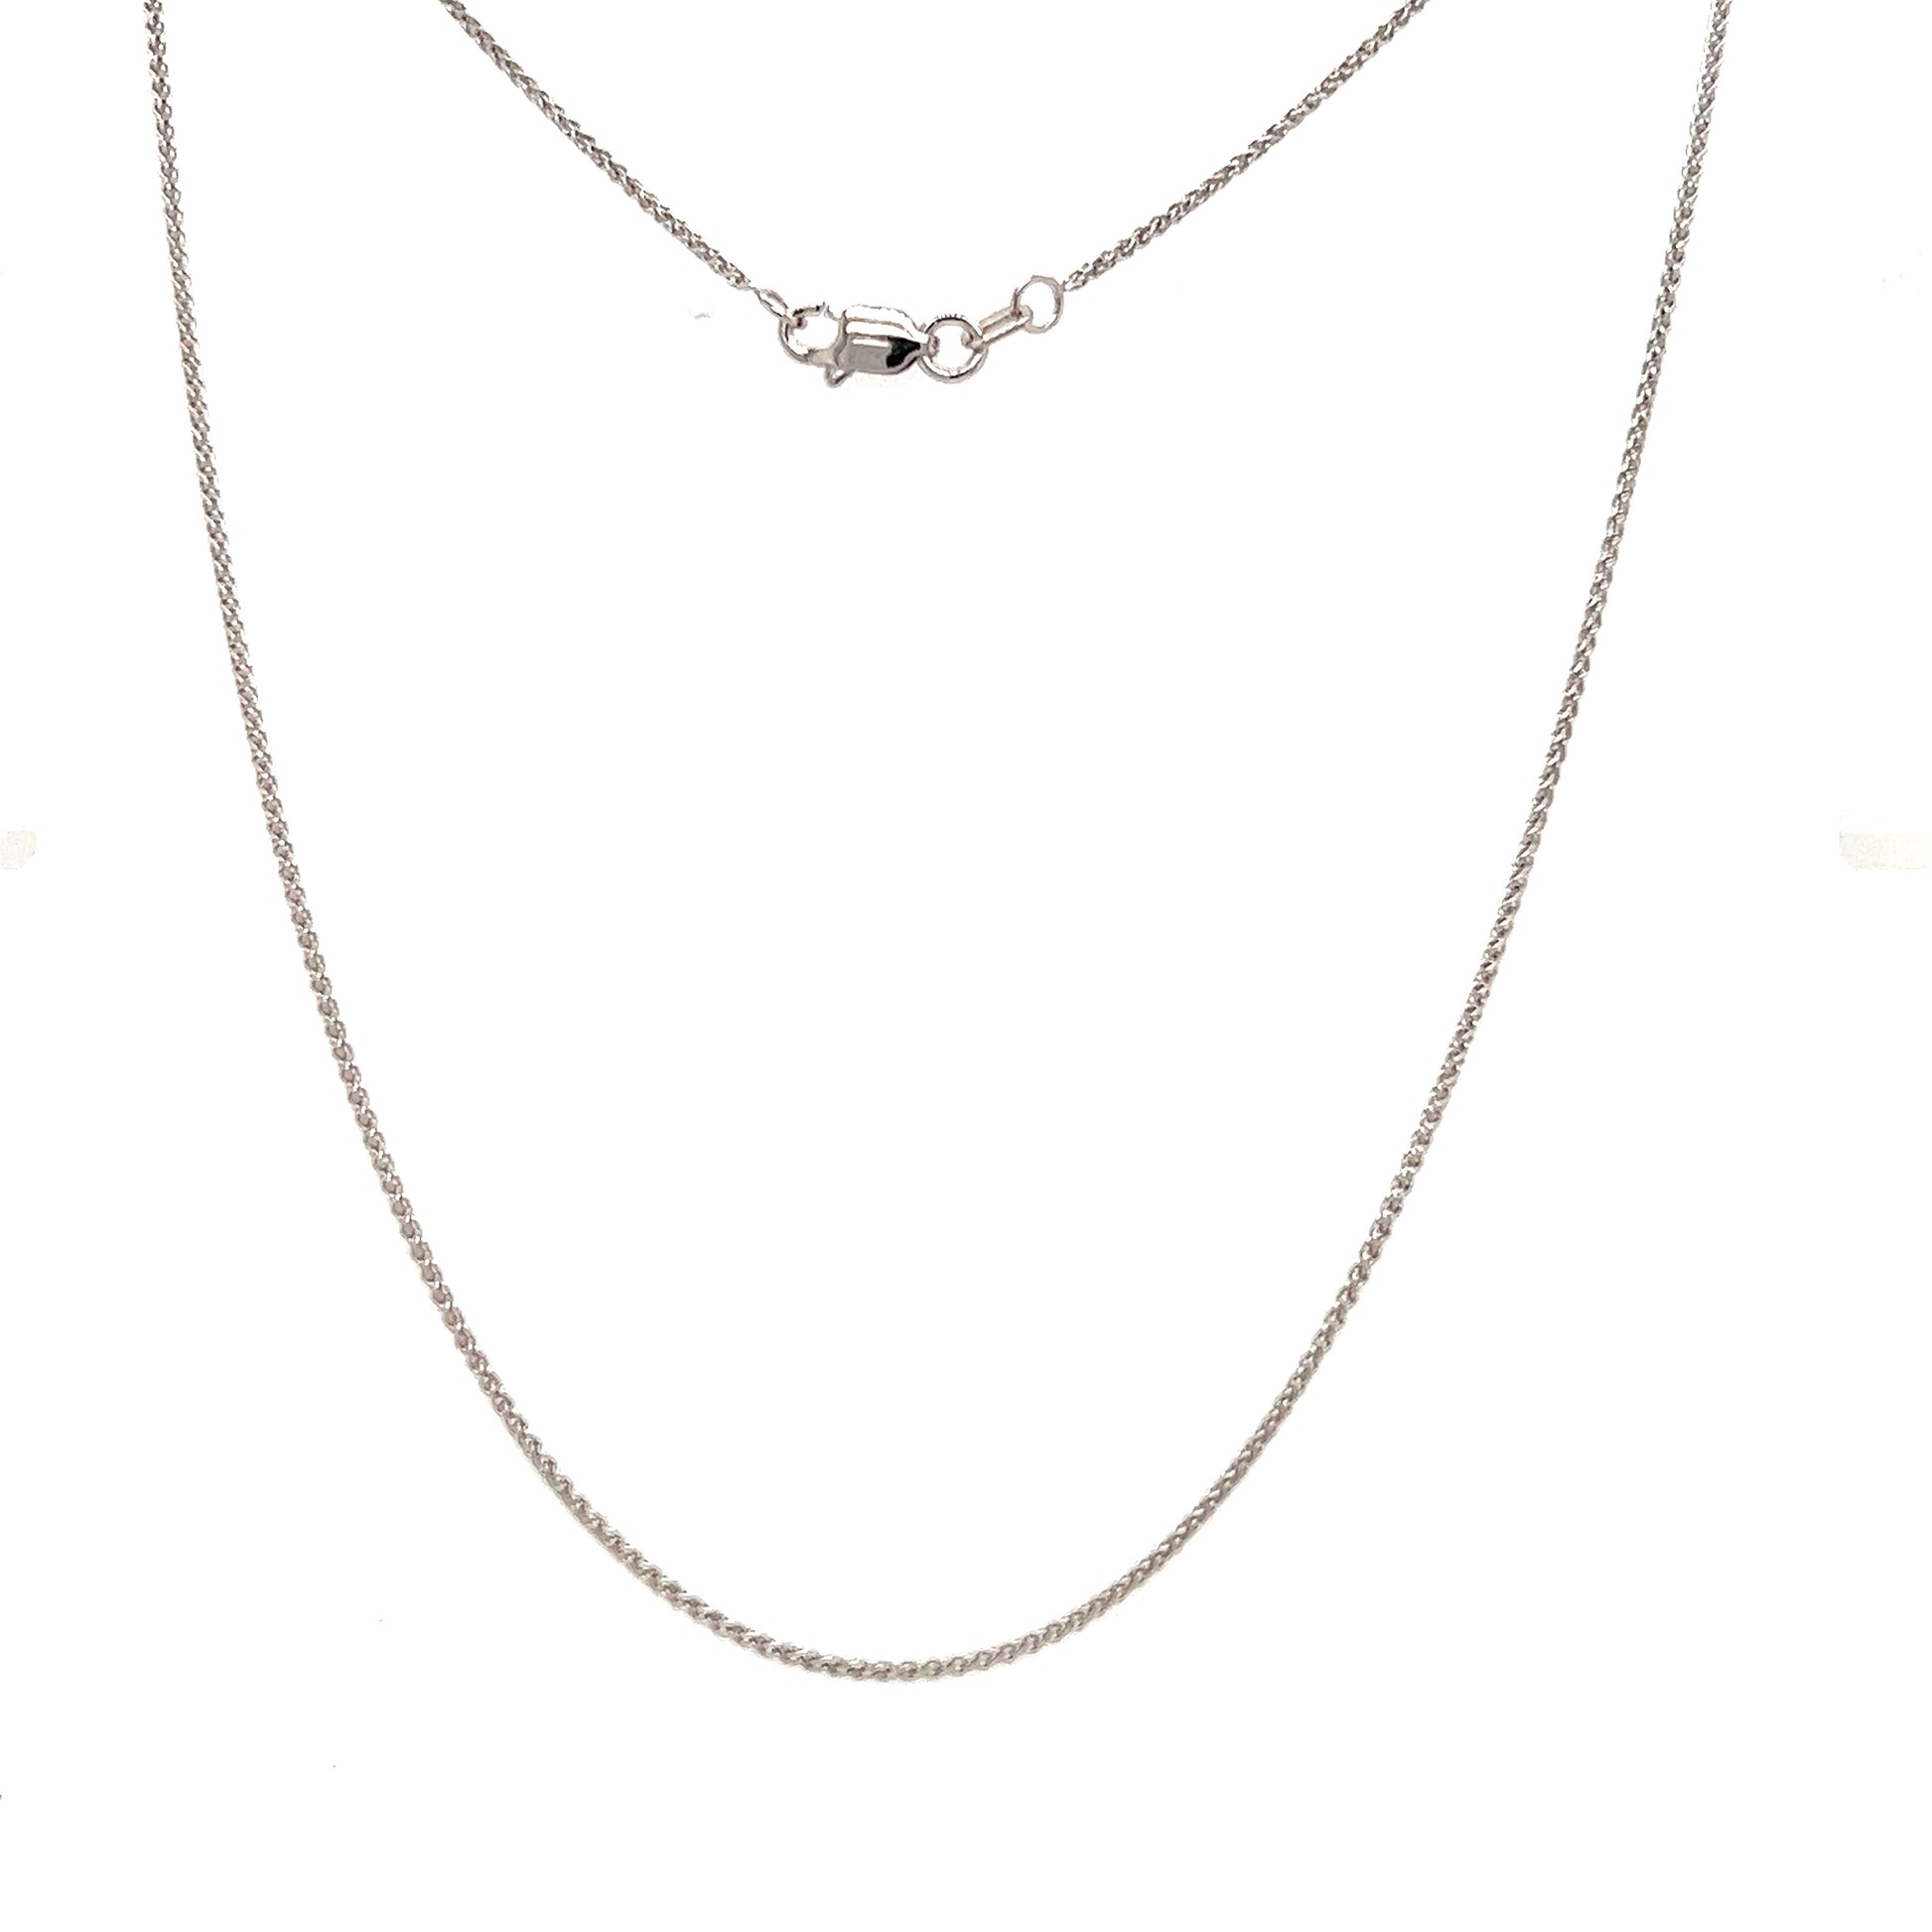 Wheat Chain 1.05mm with 20in Length in 14K White Gold Full Chain View